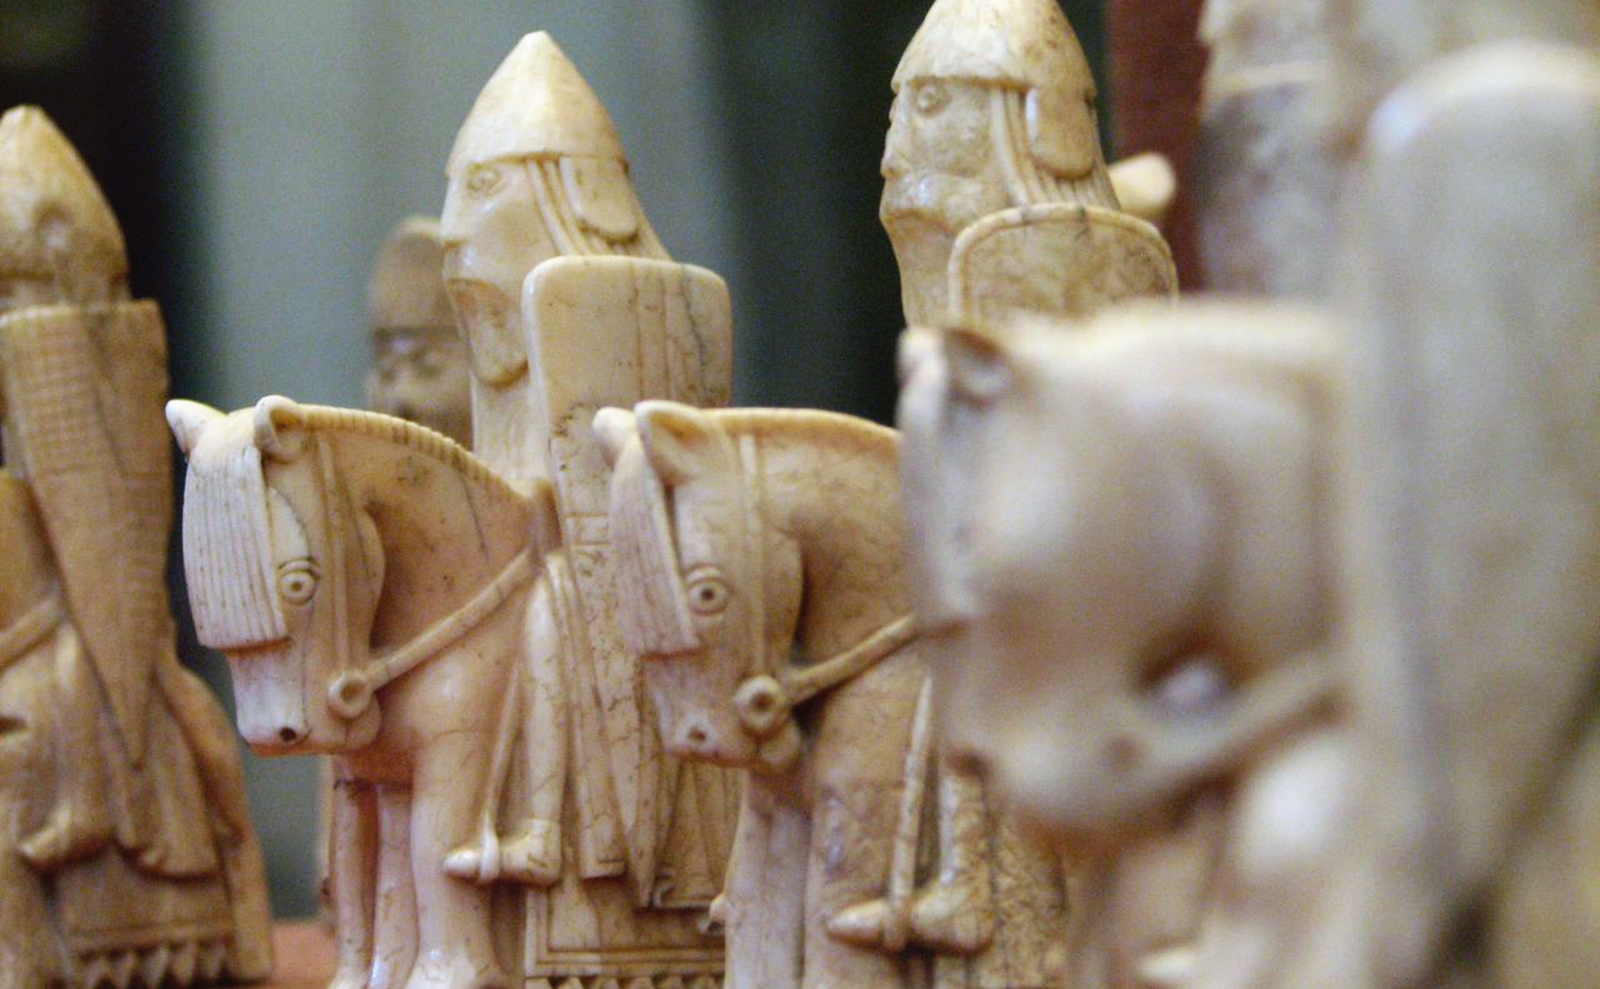 The Thoroughly Charming and Possibly Unreliable Story of the Lewis Chessmen